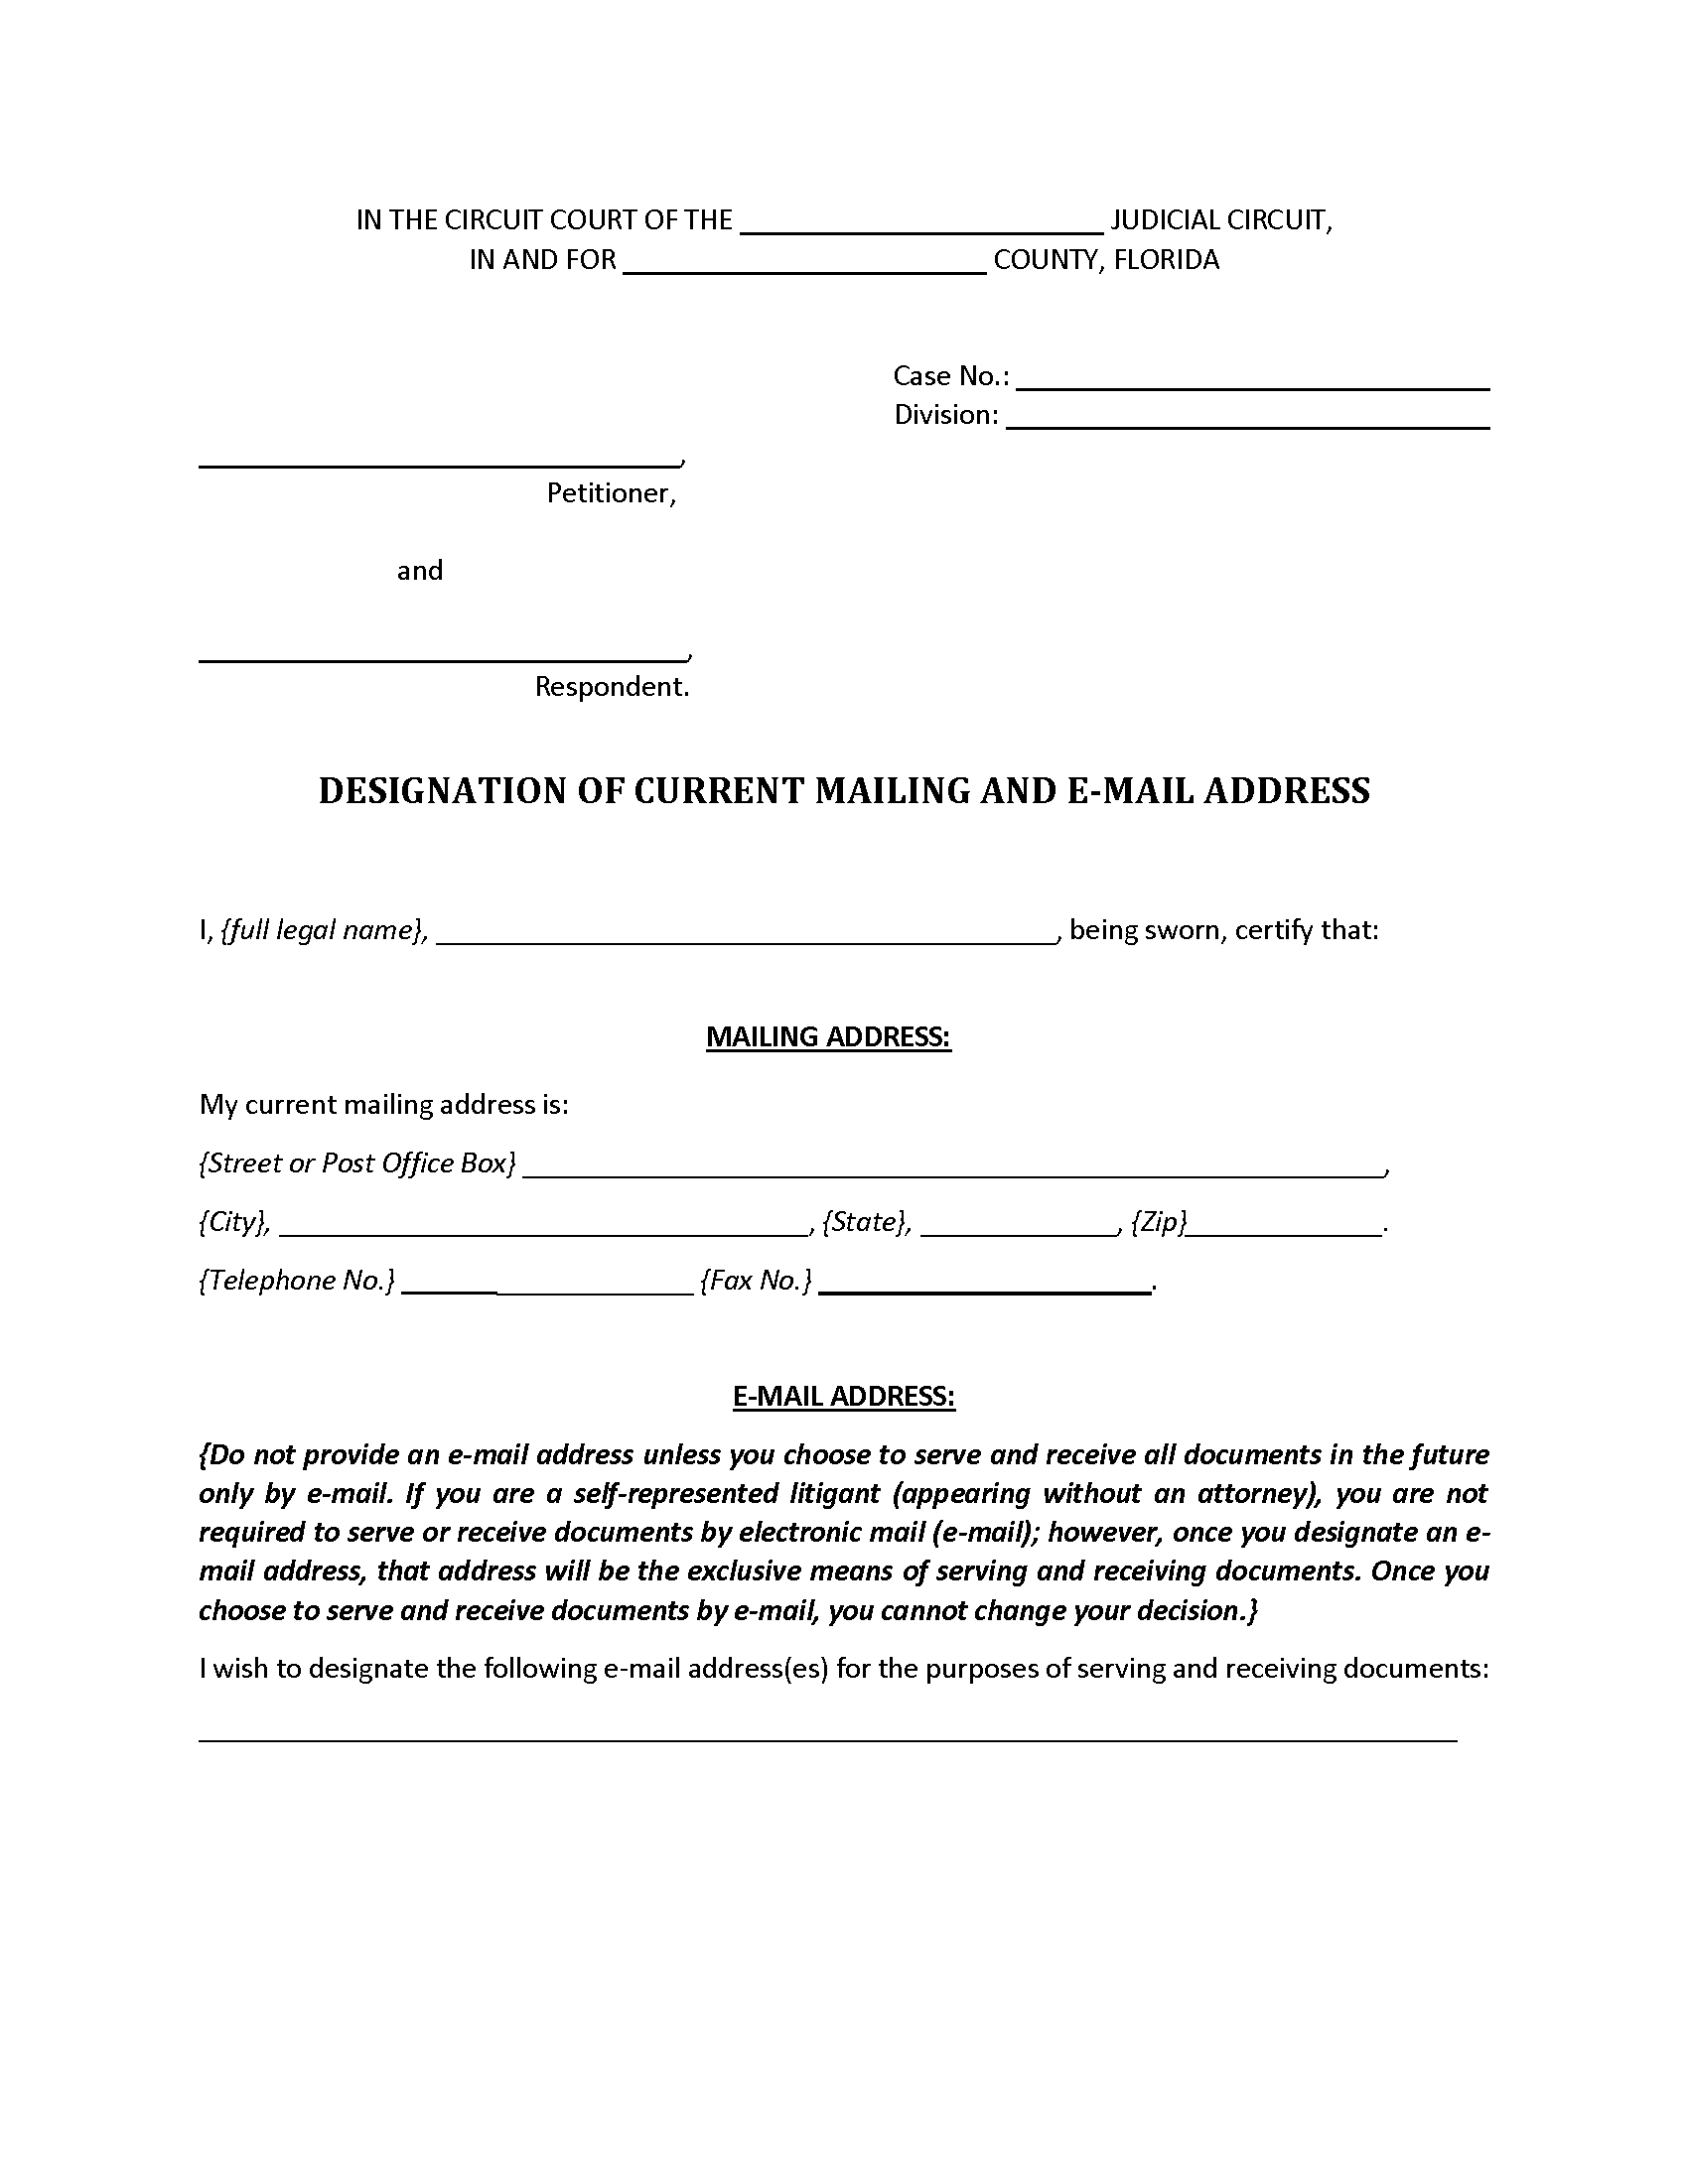 Designation of Current Mailing and E-mail Address Form